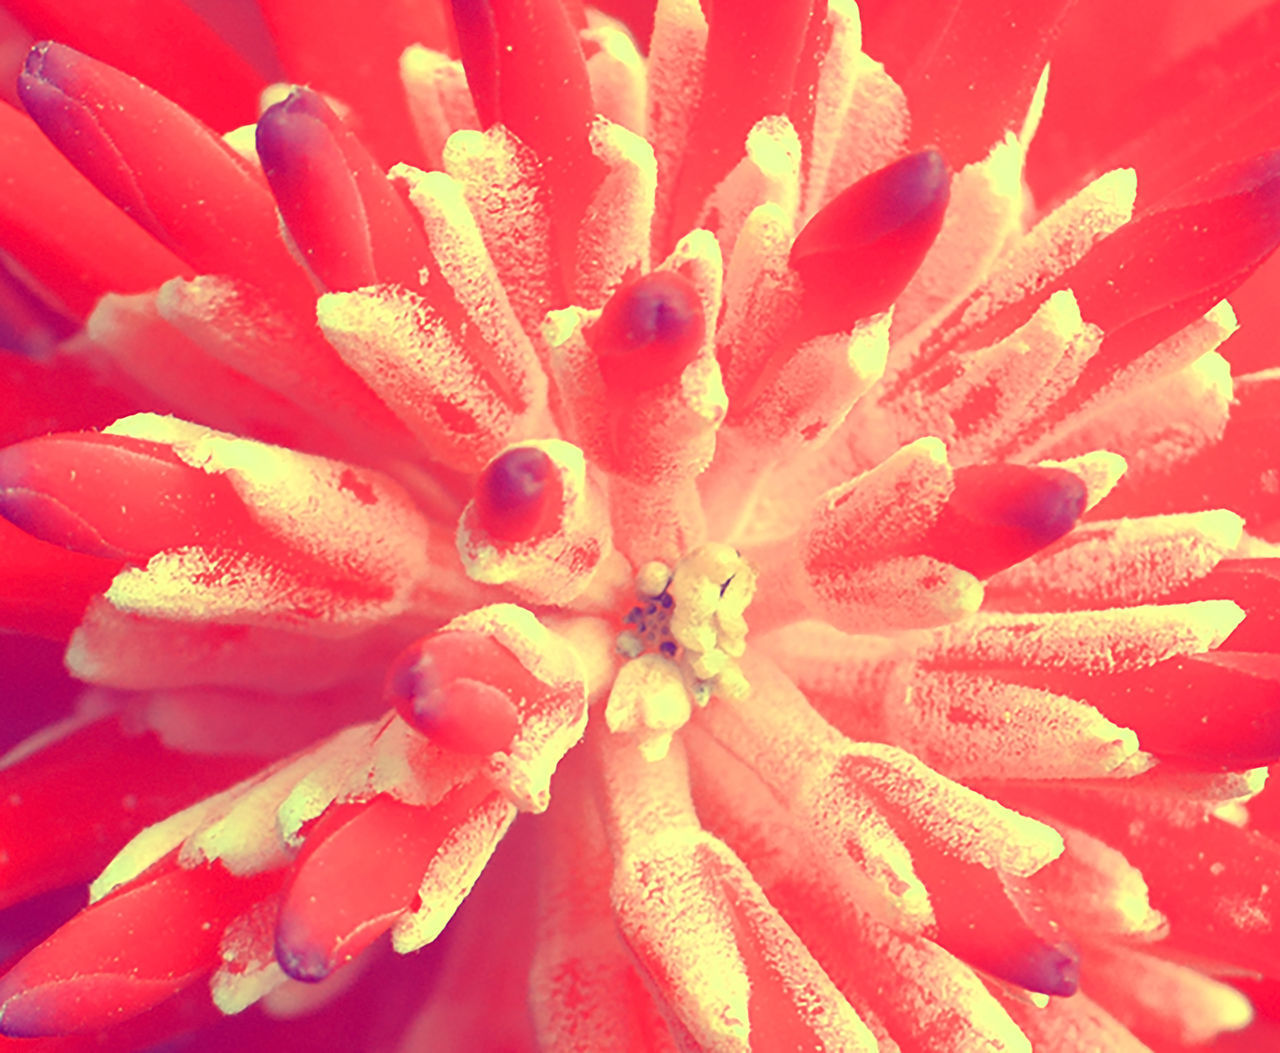 EXTREME CLOSE-UP OF RED FLOWER